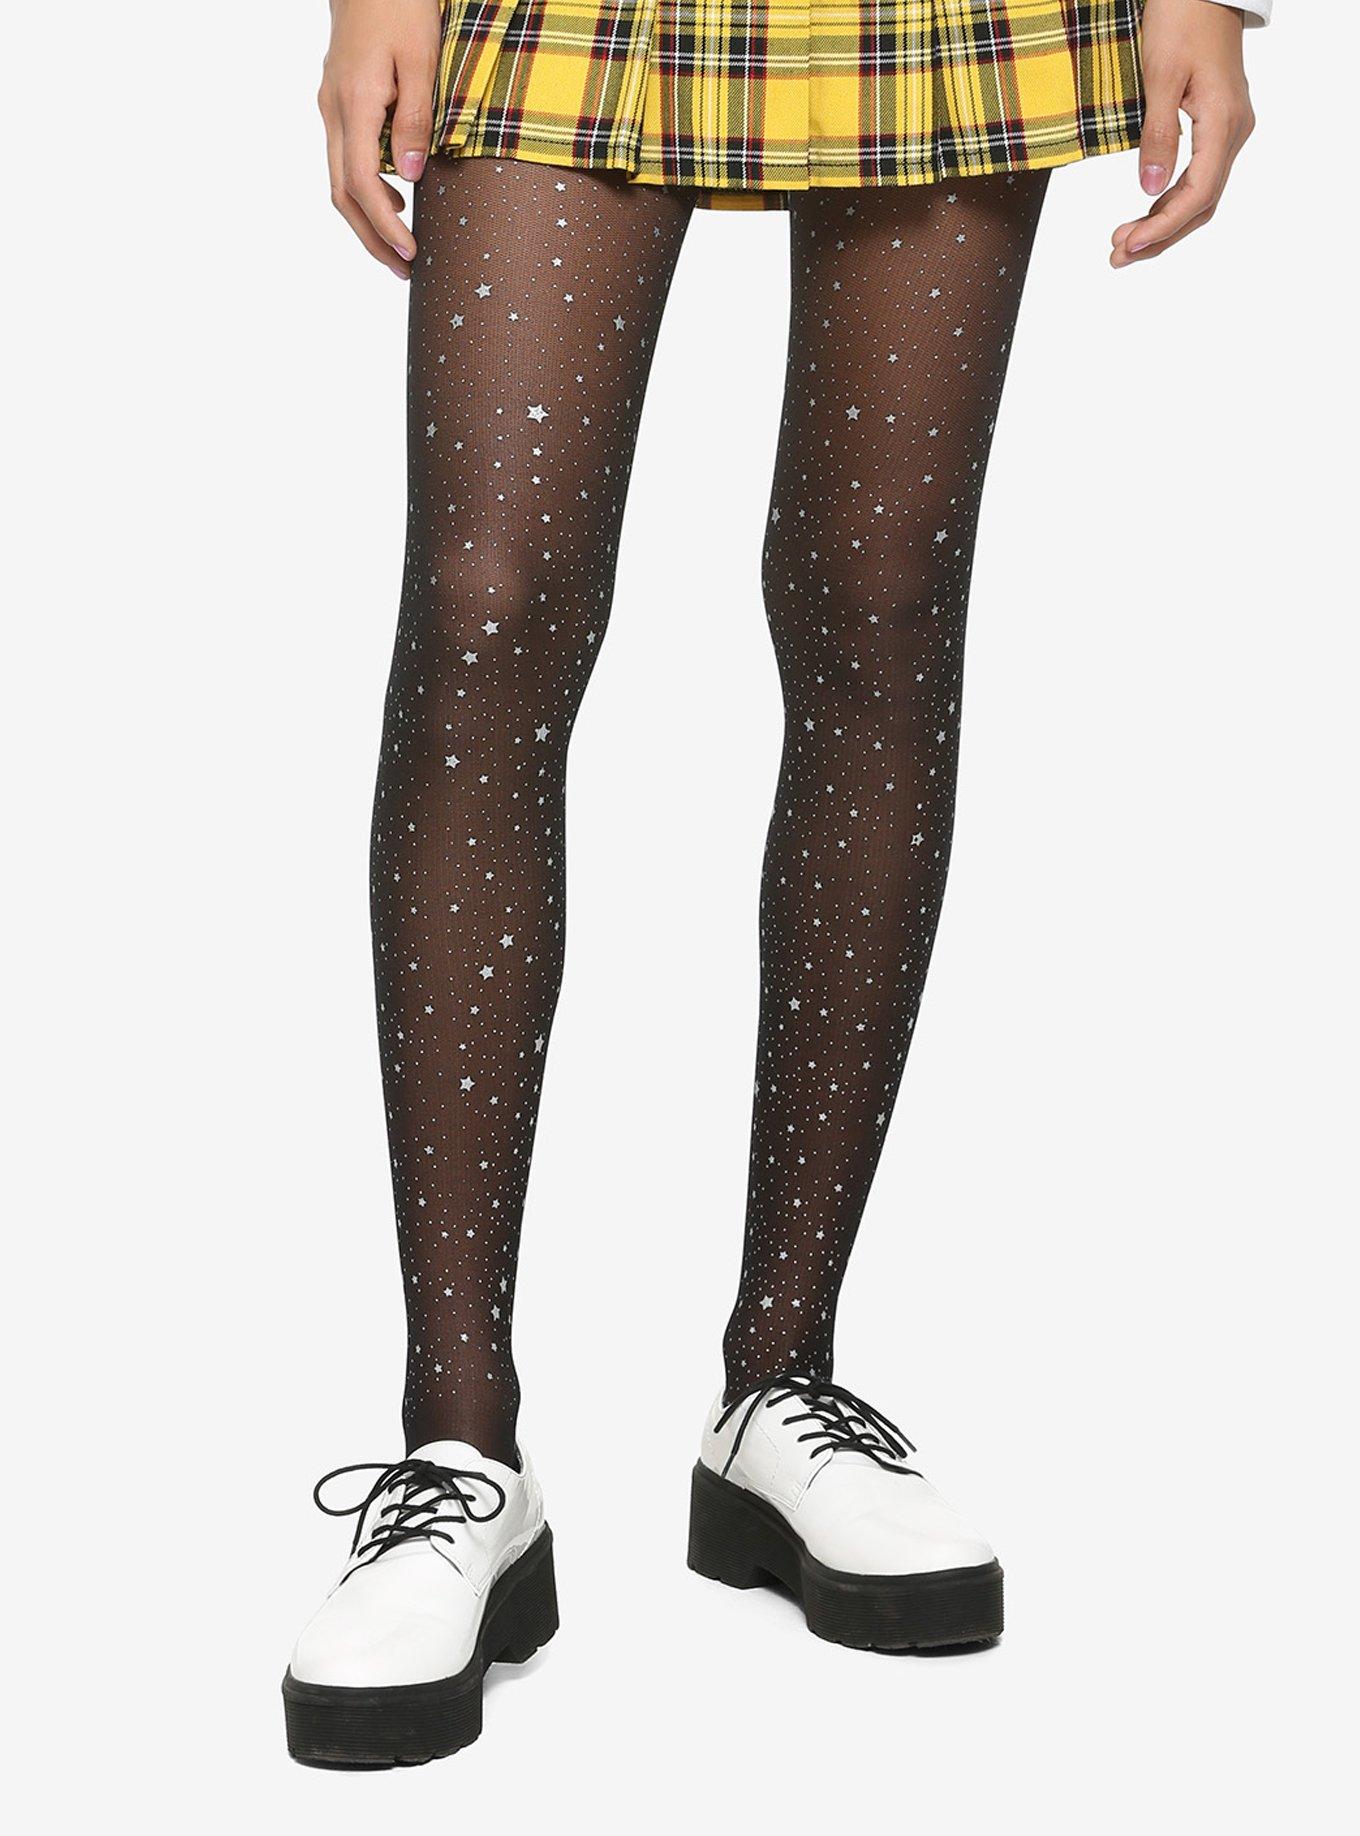 Star tights with gold or silver print - Virivee Tights - Unique tights  designed and made in Europe